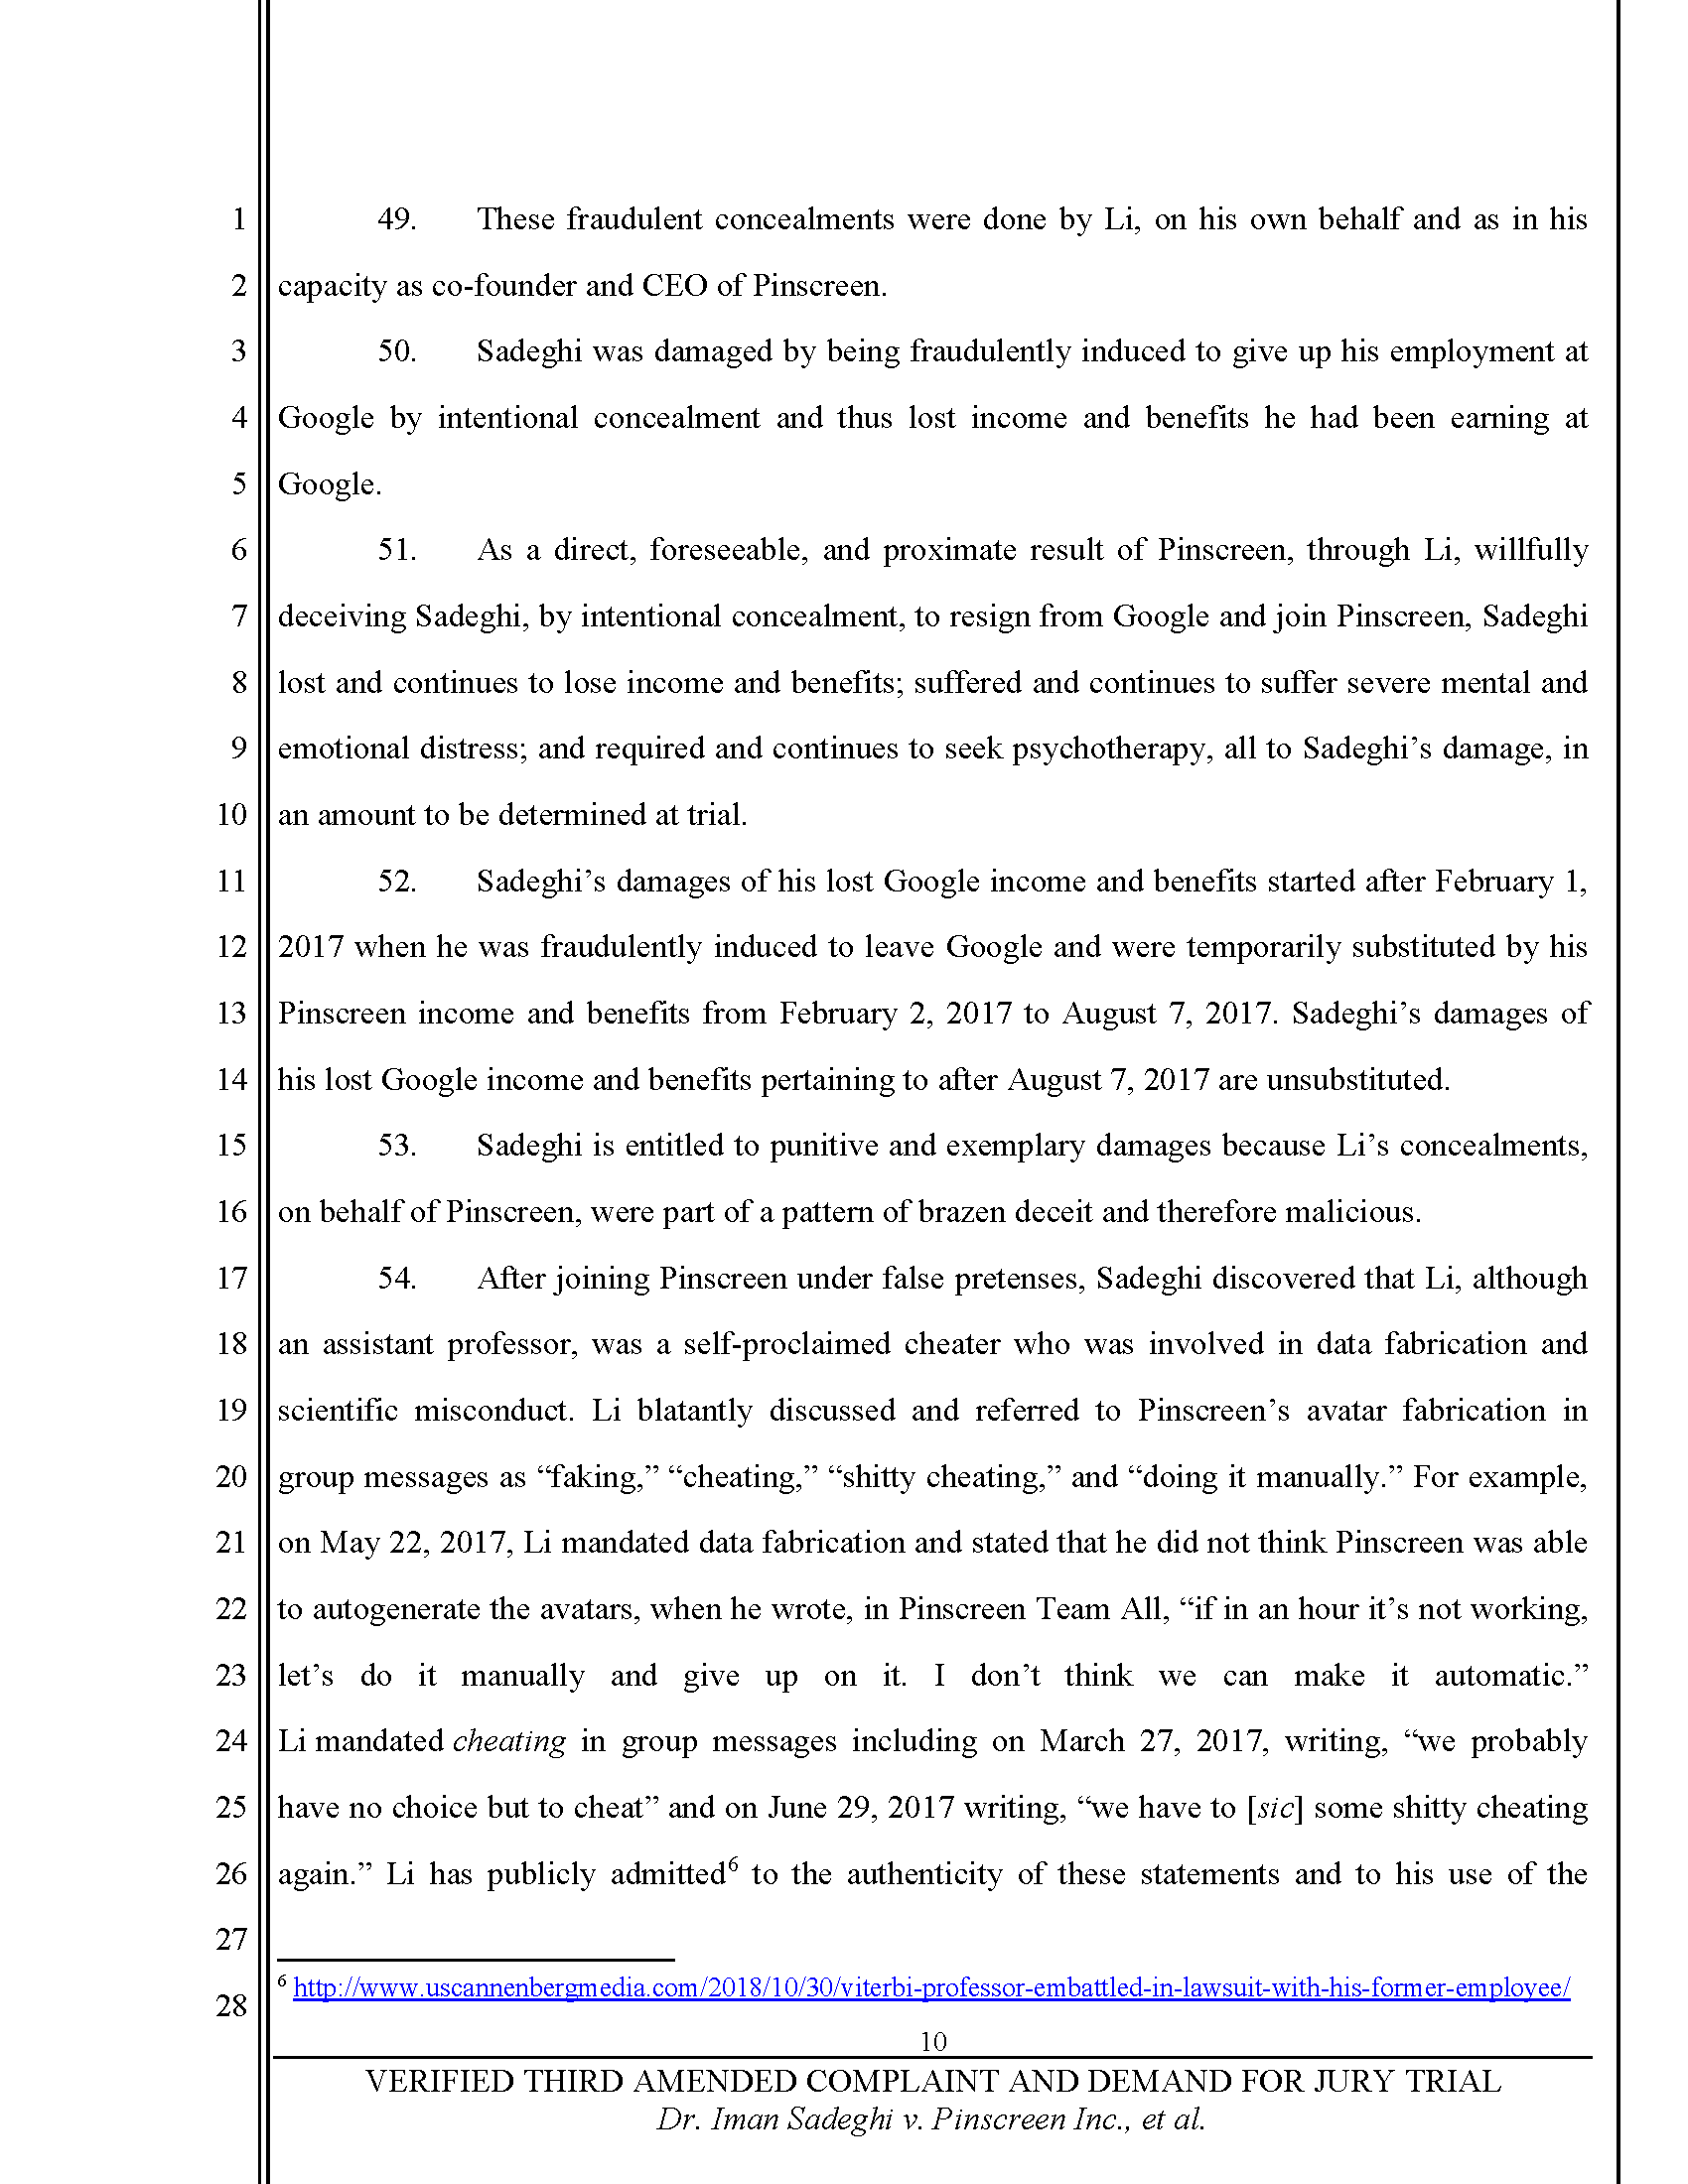 Third Amended Complaint (TAC) Page 11